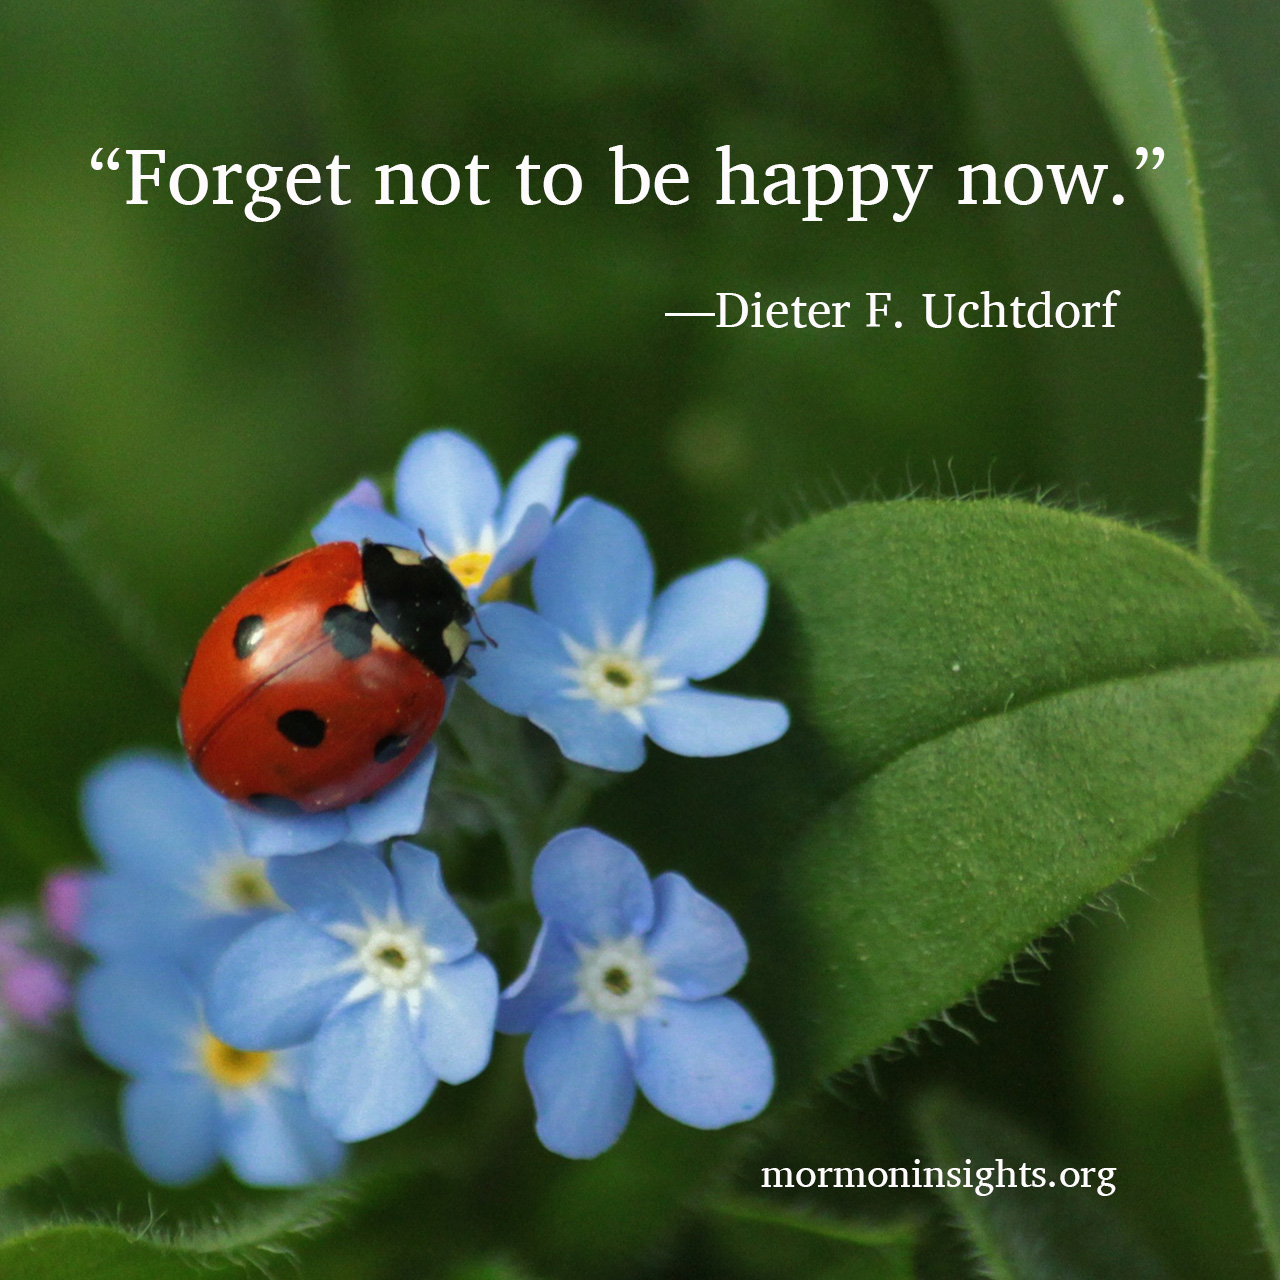 "Forget not to be happy now." —Dieter F. Uchtdorf